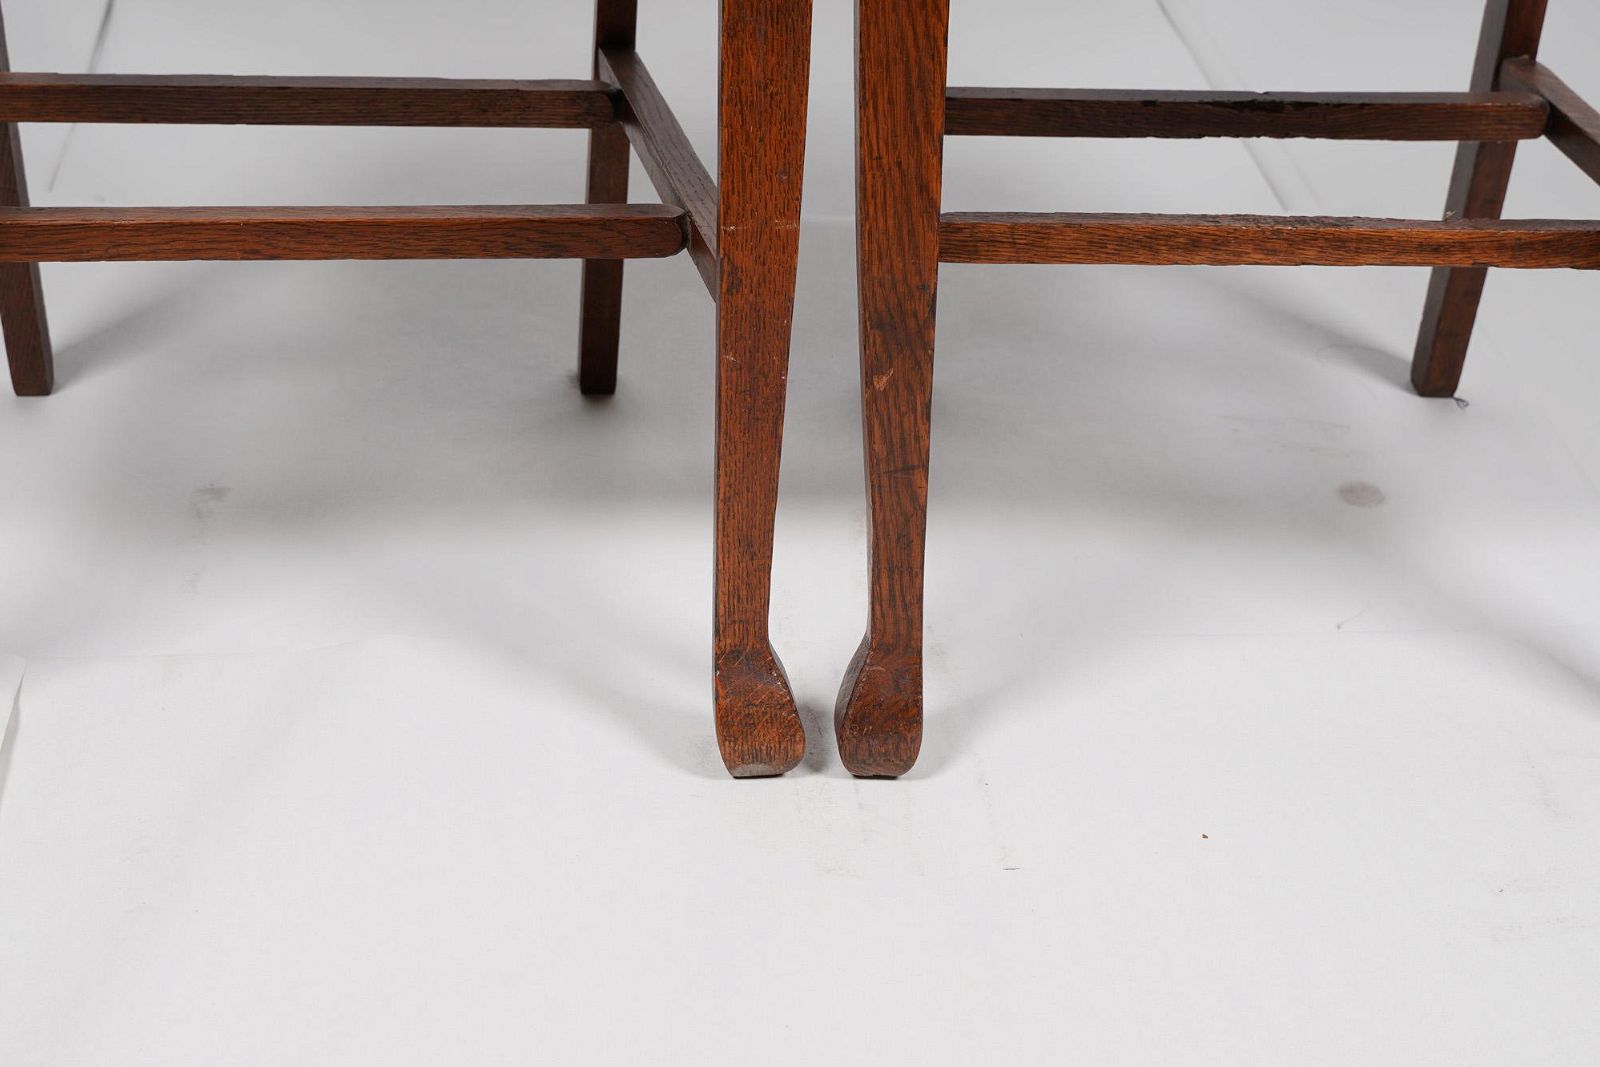 AF2-160: ANTIQUE SET OF 4 FOUR EARLY 20TH CENTURY AMERICAN OAK DINING CHAIRS